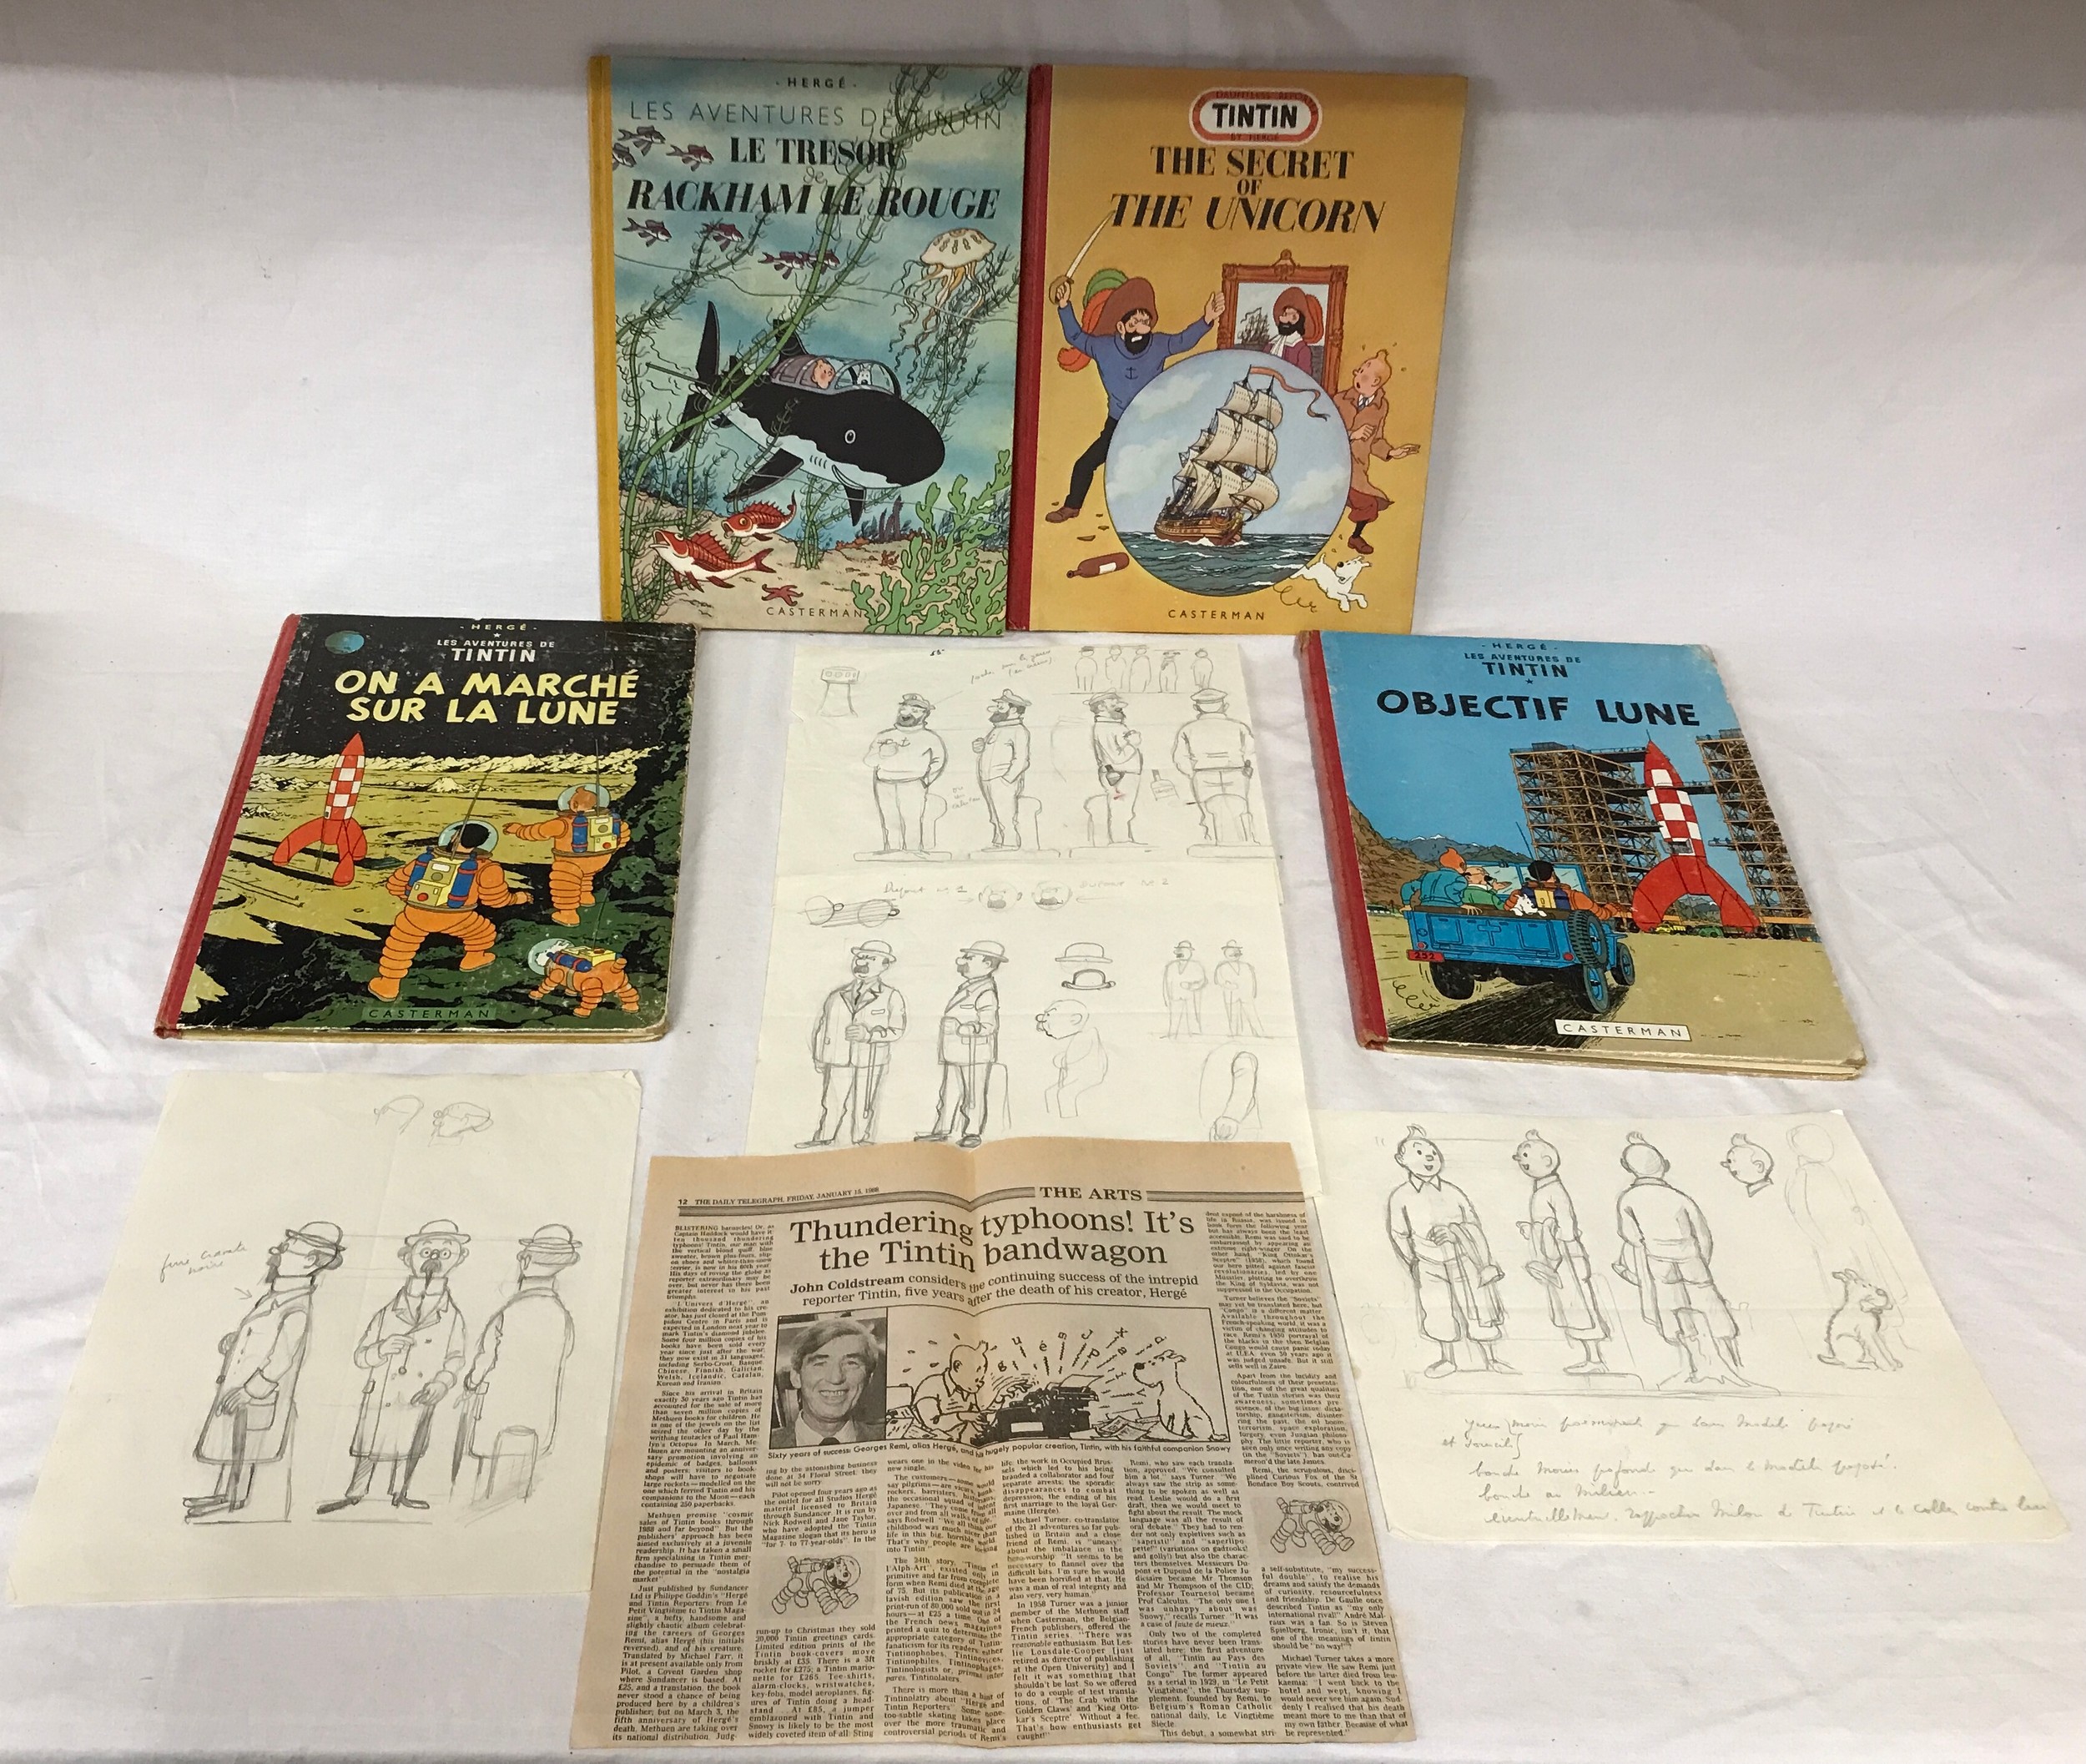 Hergé: Four original sketches by Belgium artist Hergé along with four comic books from the 40s and